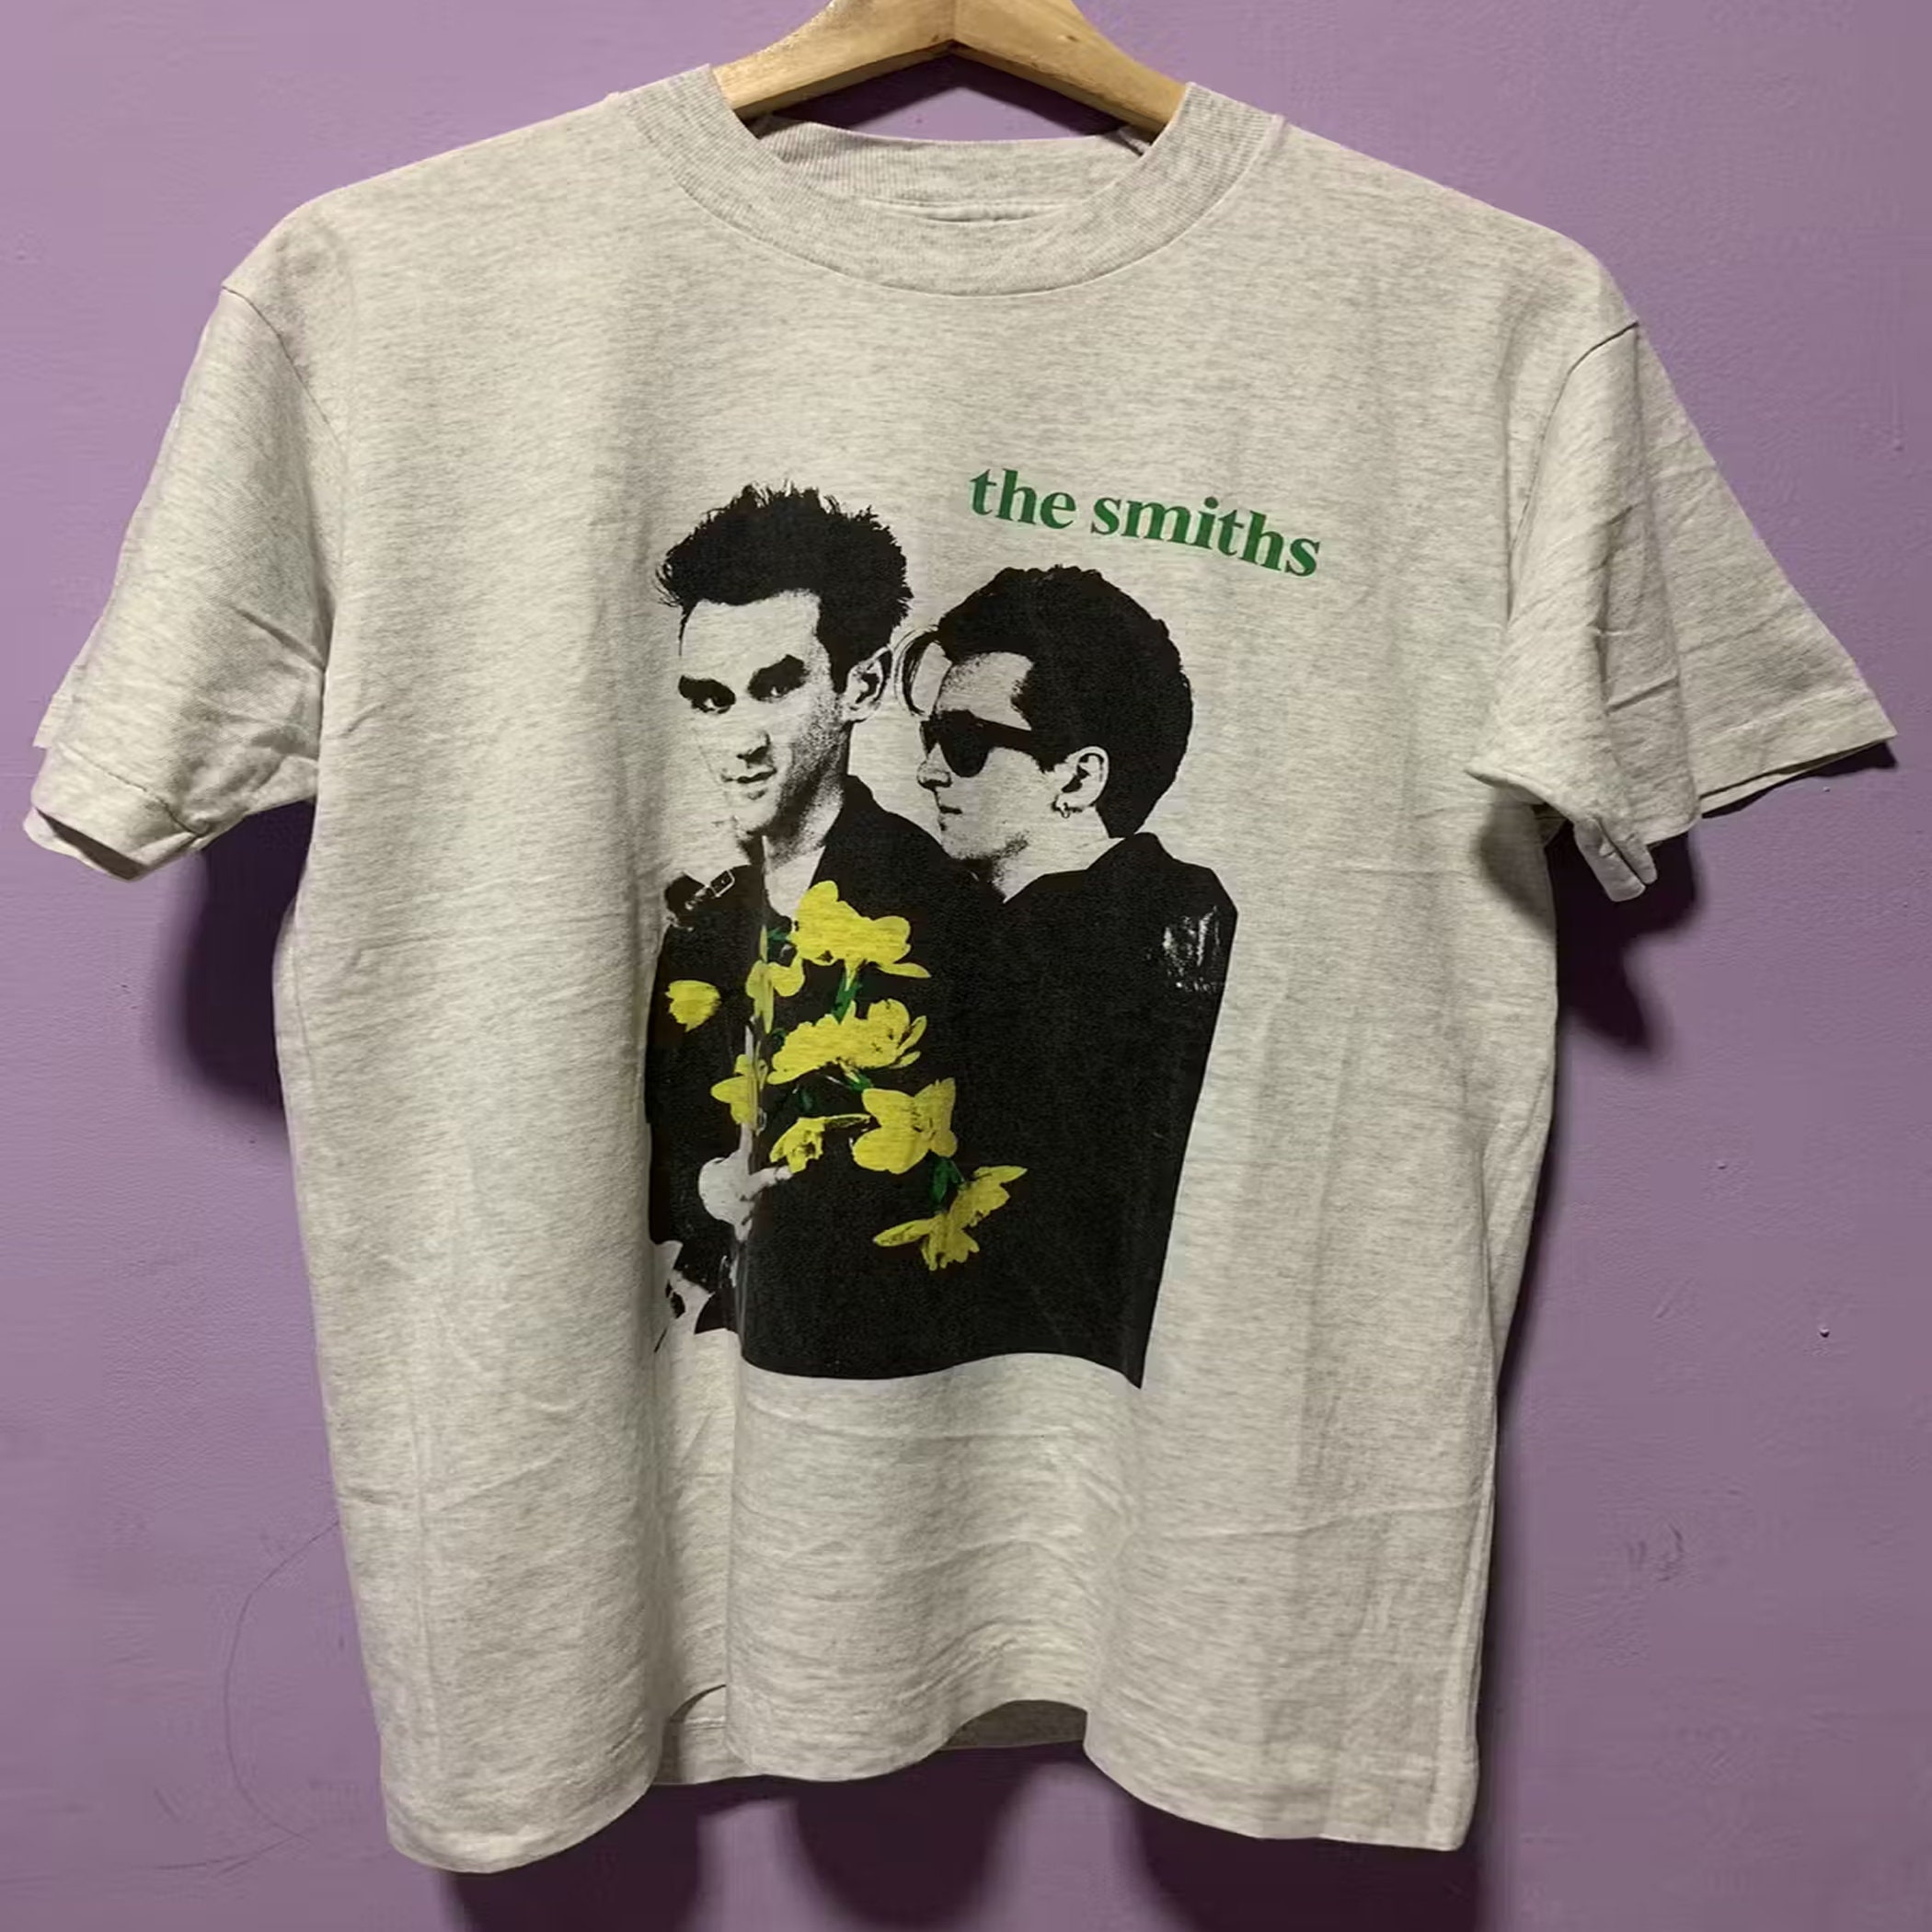 Discover The Smiths T-Shirt, Vintage The Smiths Shirt, The Smiths Rock Band T-shirt, 90s Rock Band Shirt